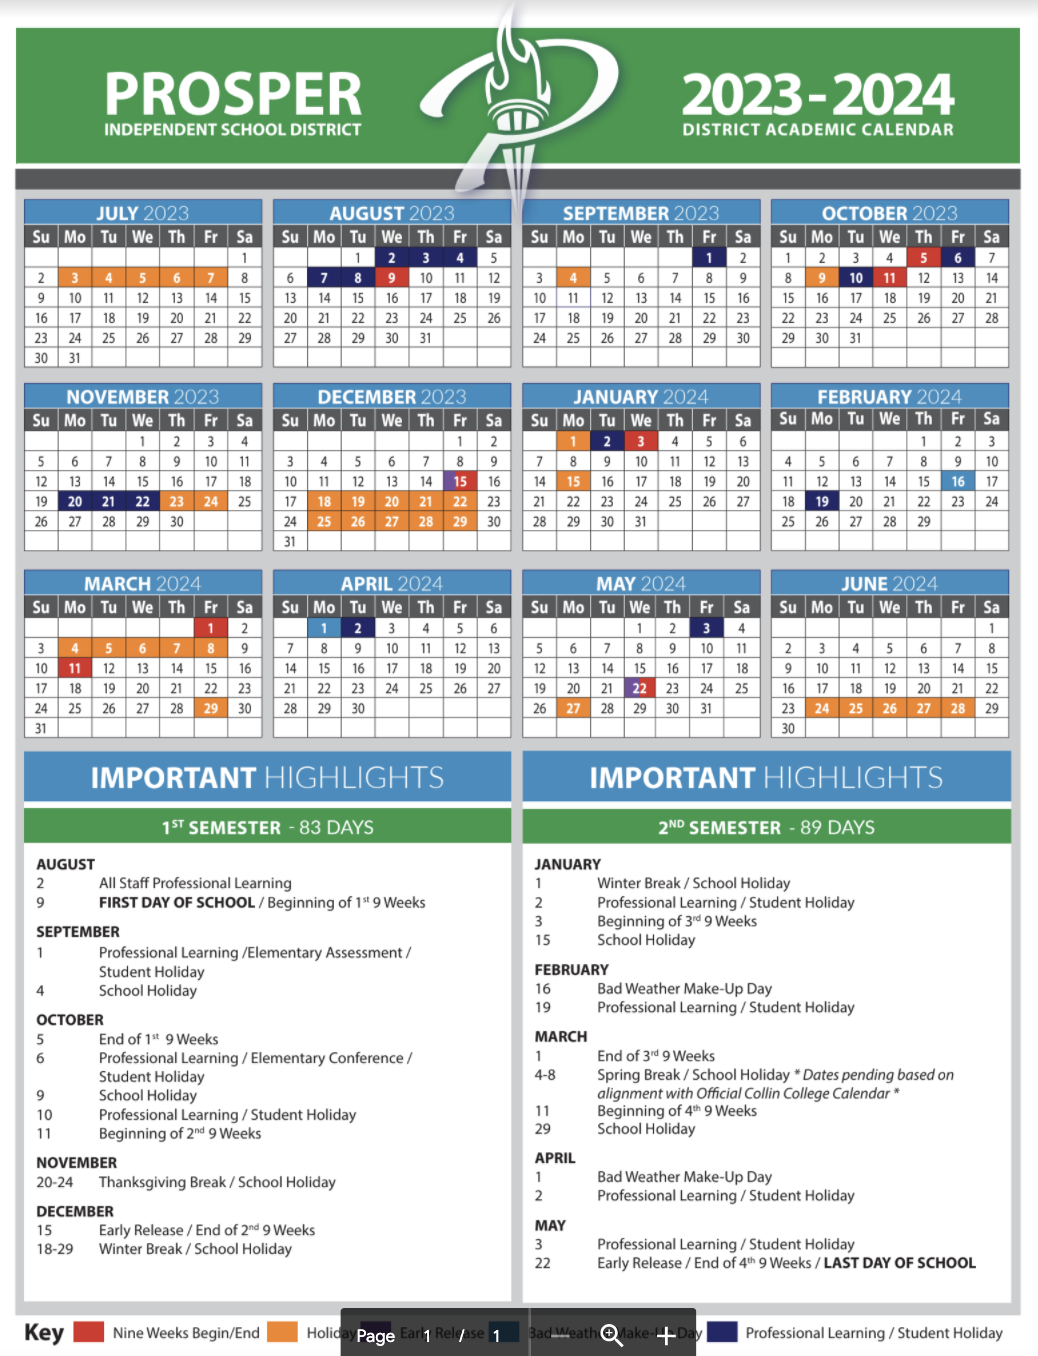 Plano Isd Calendar 2022 23 Here Are Prosper Isd's School Calendars For The 2022-2023 And The 2023-2024  School Years | Cities | Checkoutdfw.com